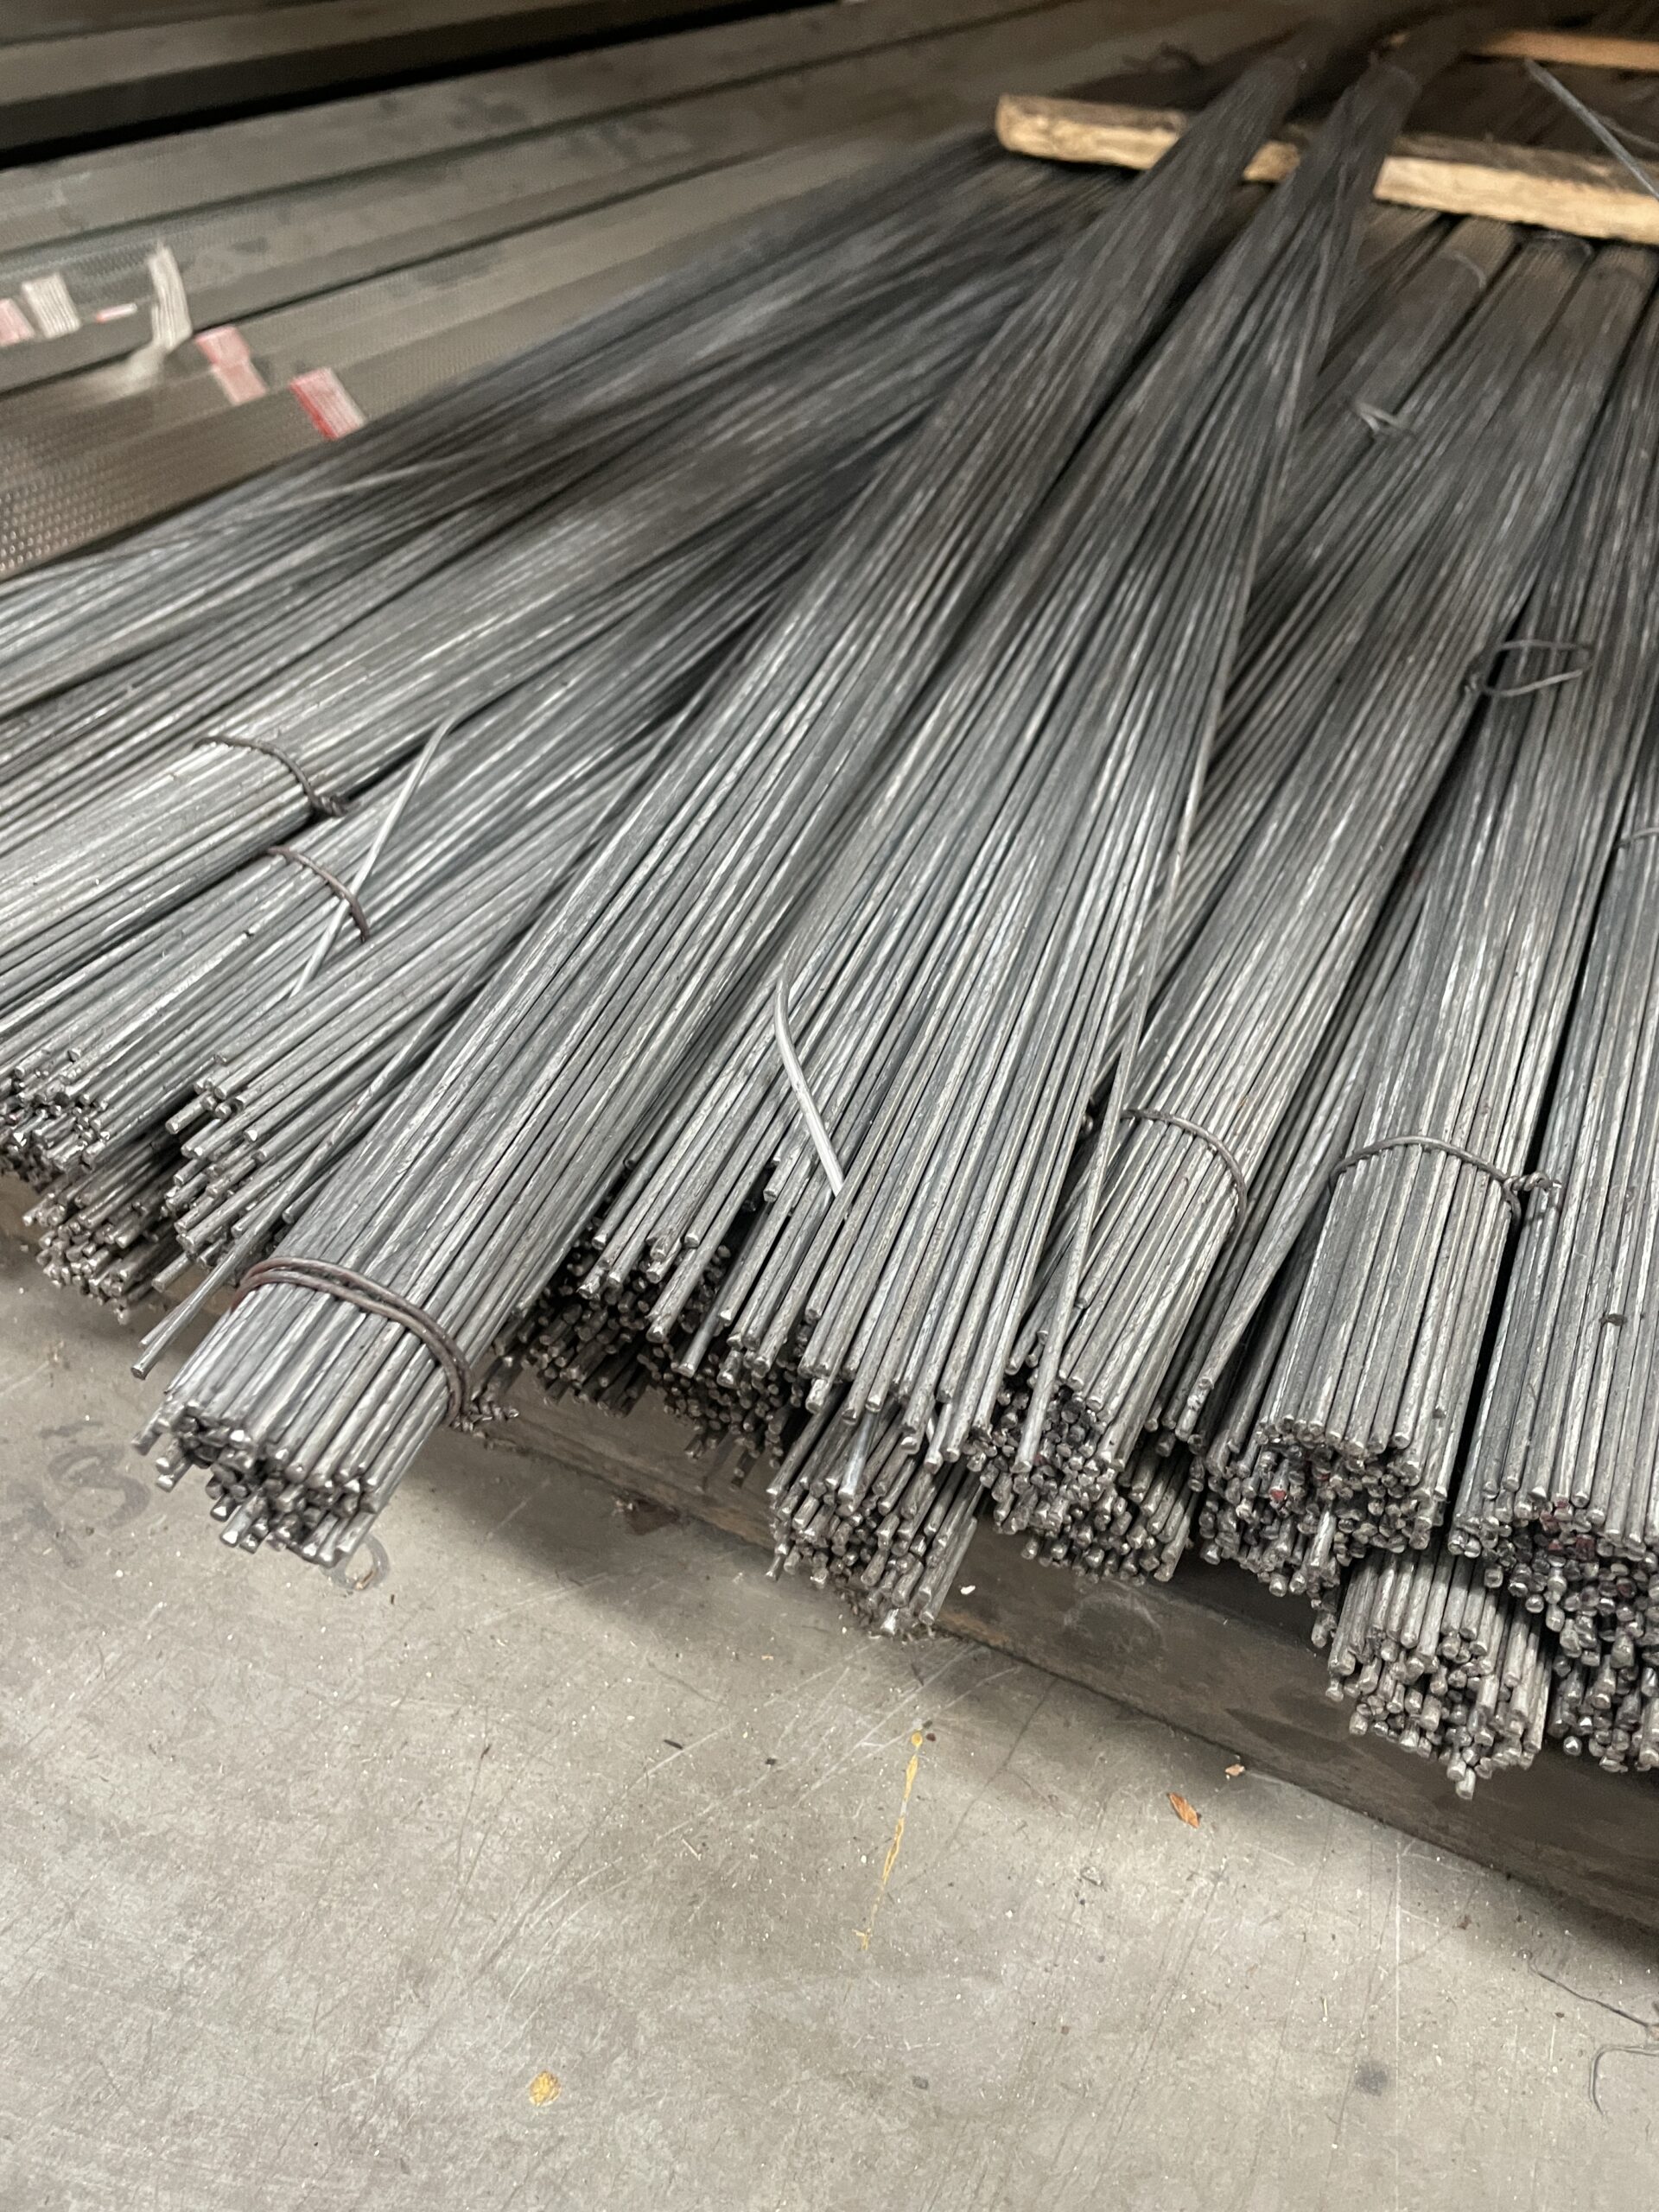 Bundles of straight galvanized hanger wires neatly organized in a warehouse setting.